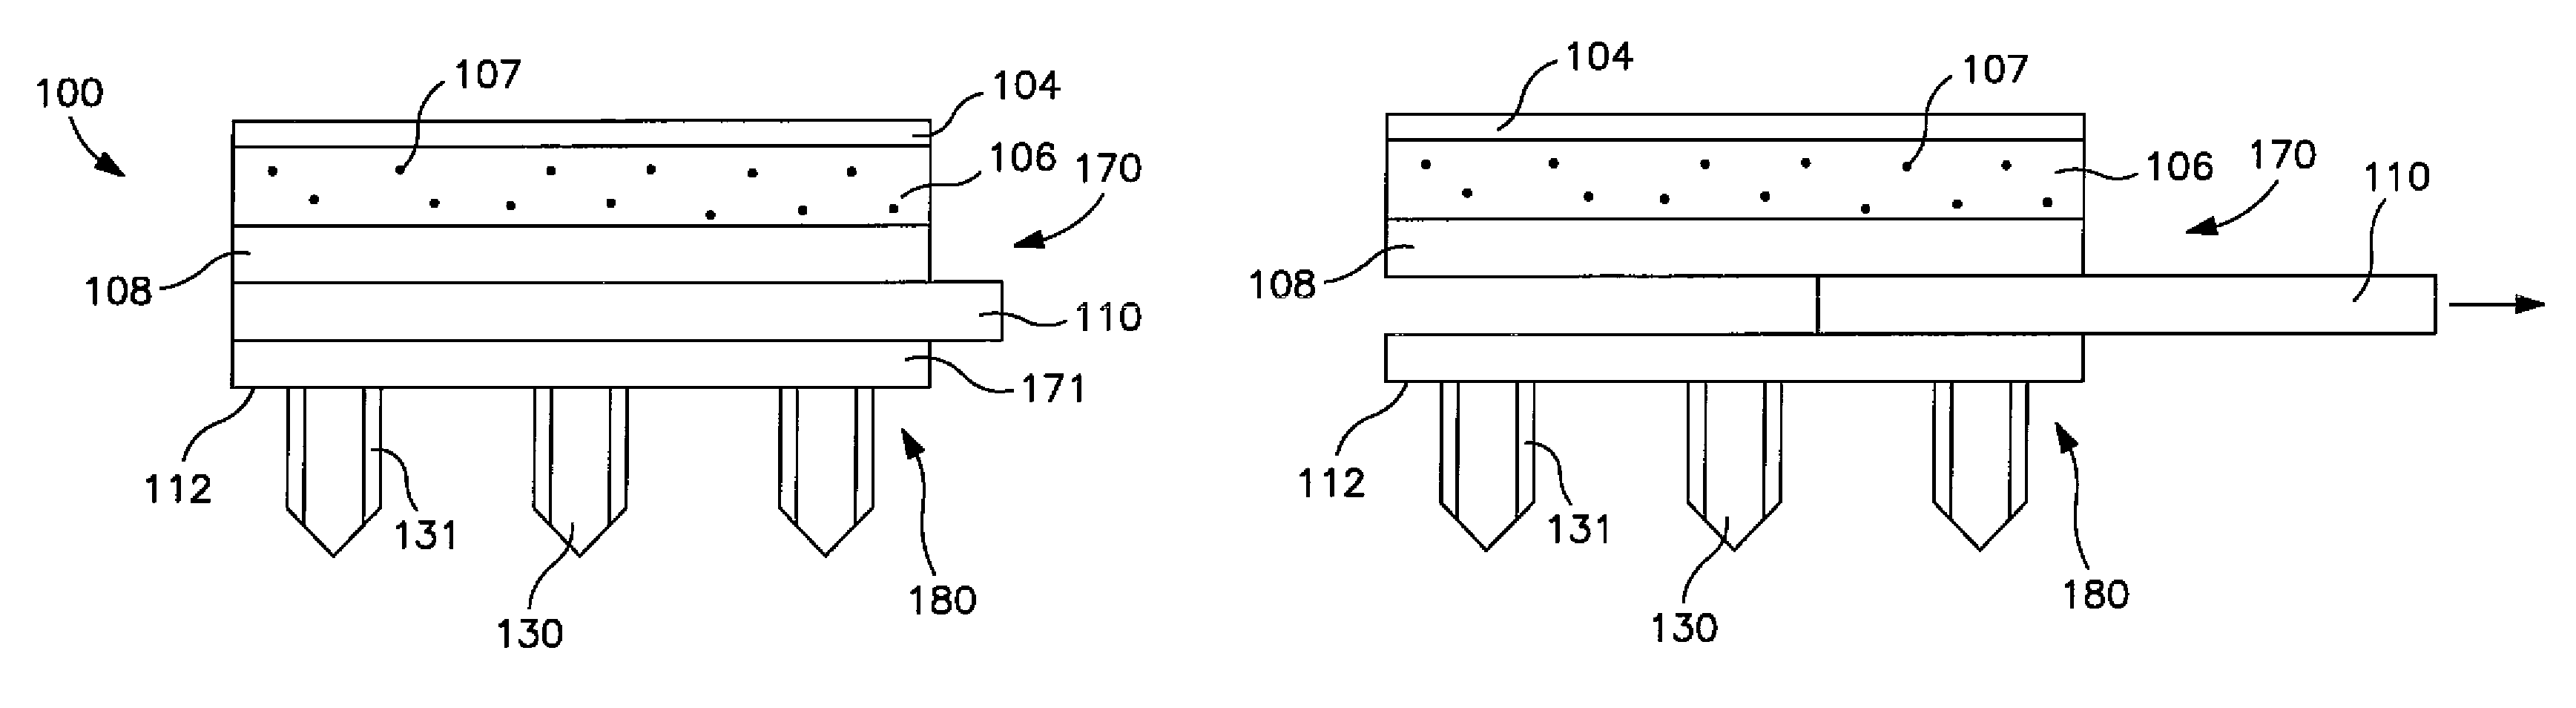 Transdermal patch containing microneedles